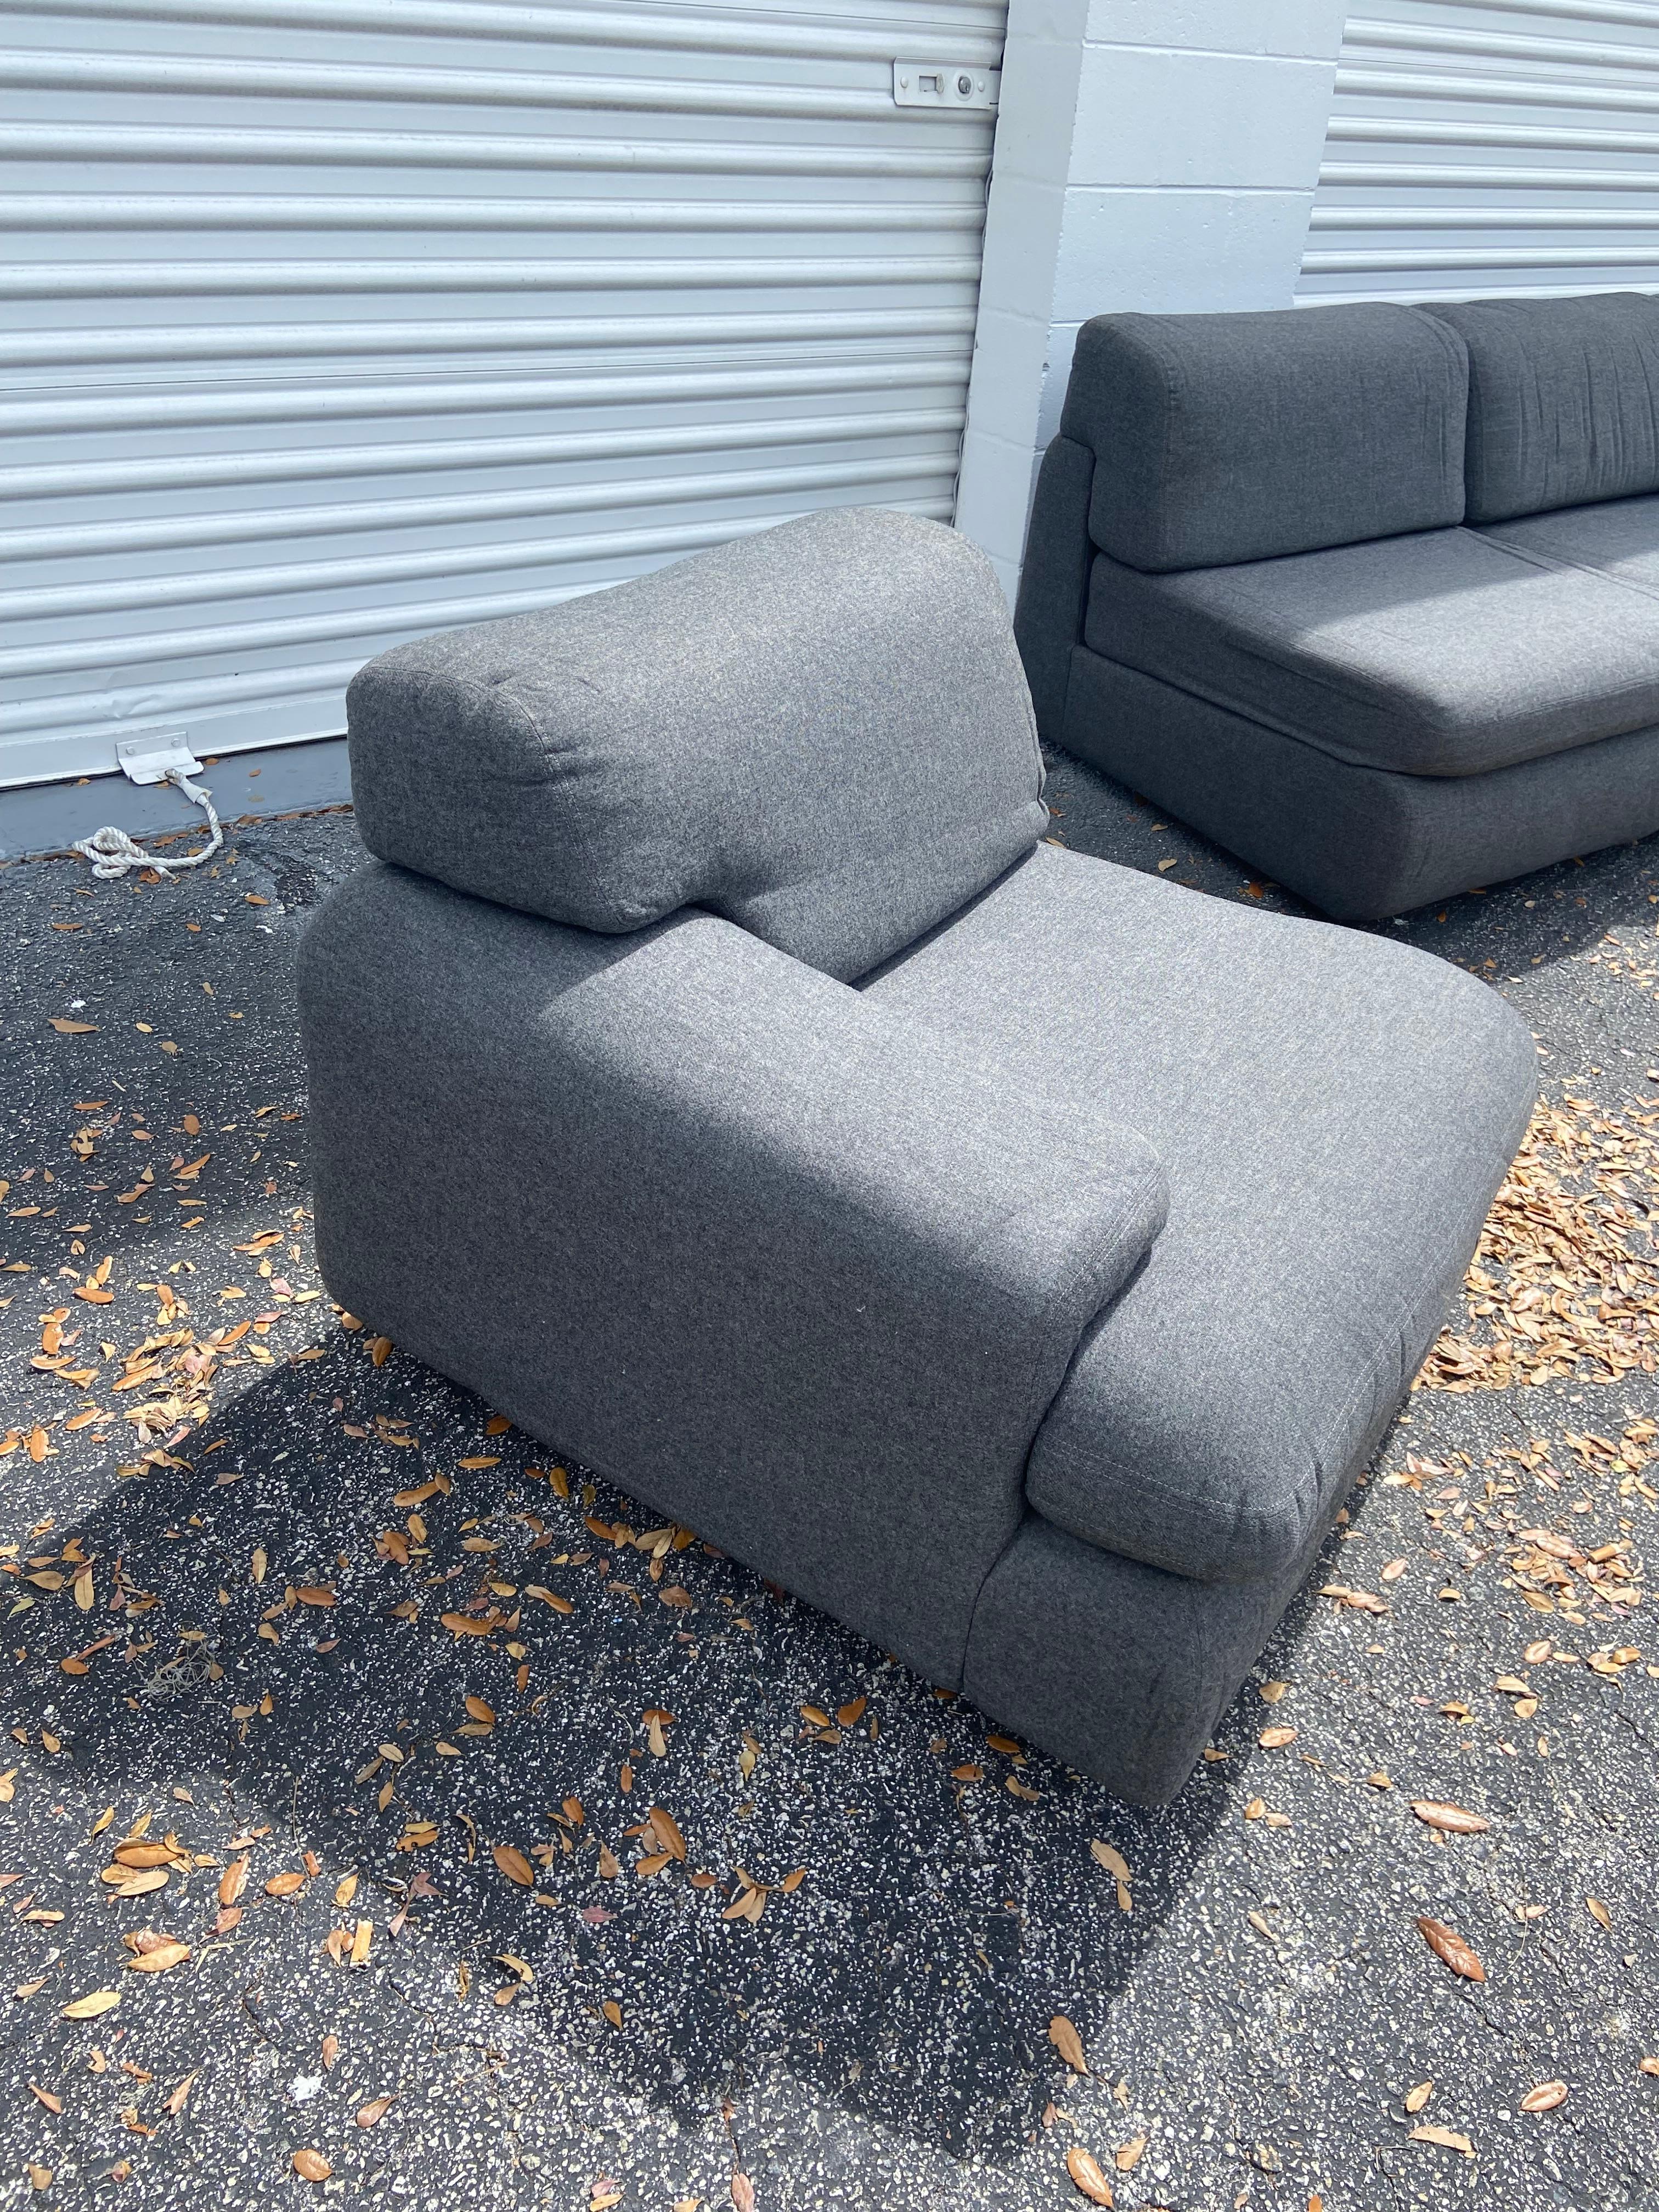 This is a fine Designed by the New York Design Institute five piece set to be configured many ways. Hand crafted GRAY flannel (does not need to be 
re-upholstered) 
having TWO one arm pieces and THREE armless pieces. From a penthouse estate in